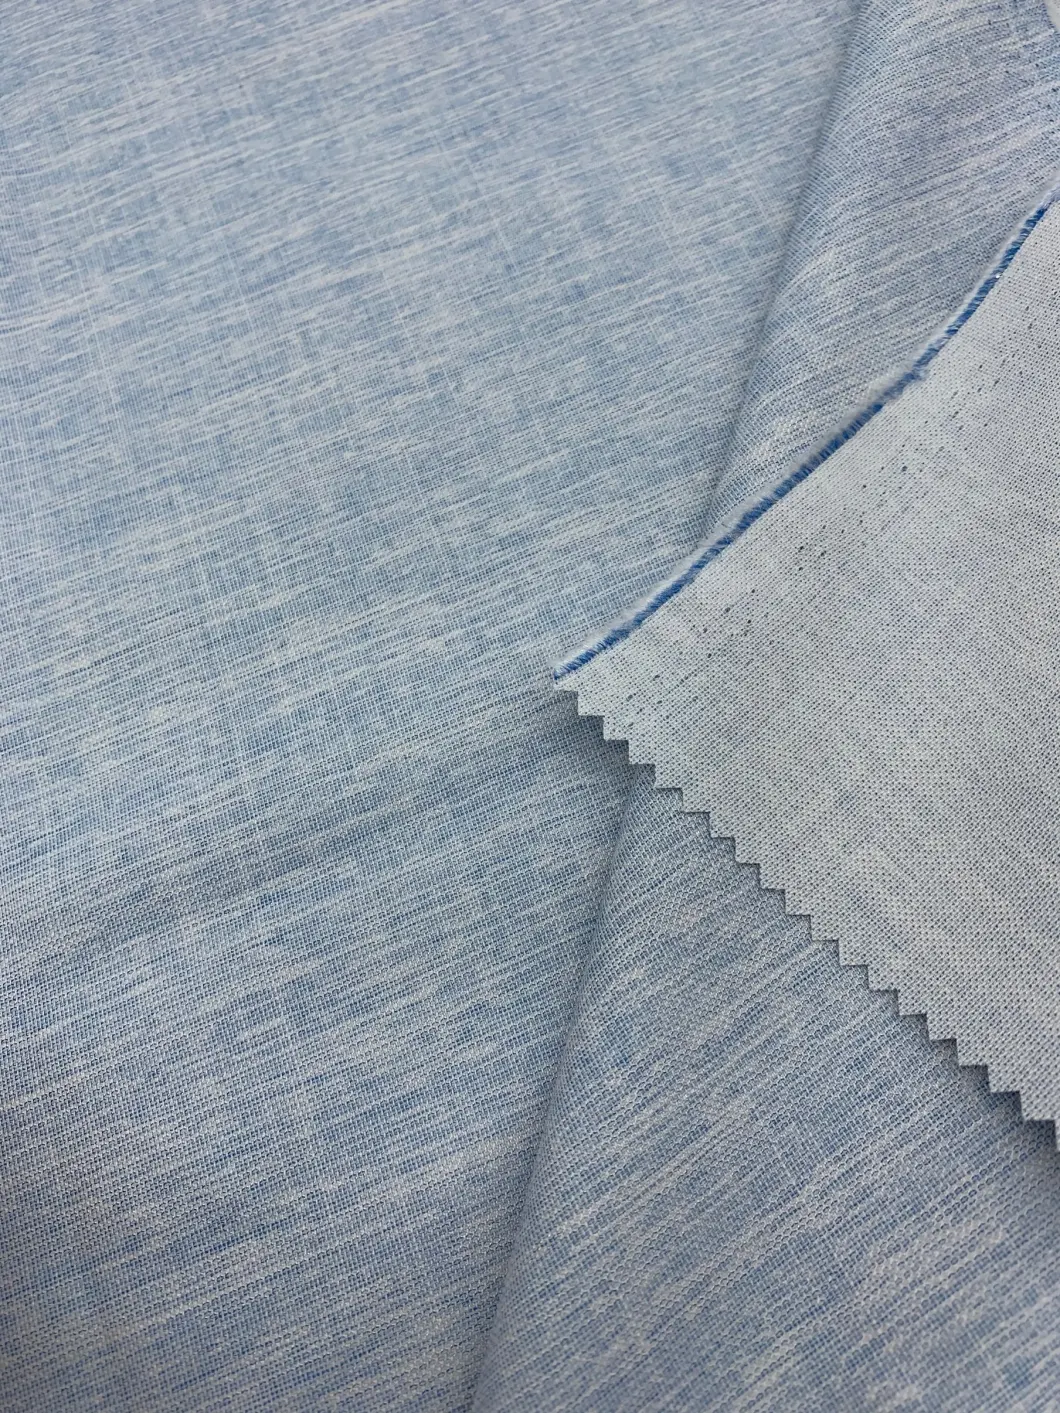 100% Polyester Printed Twill Taffeta Lining Fabric for Suit Lining